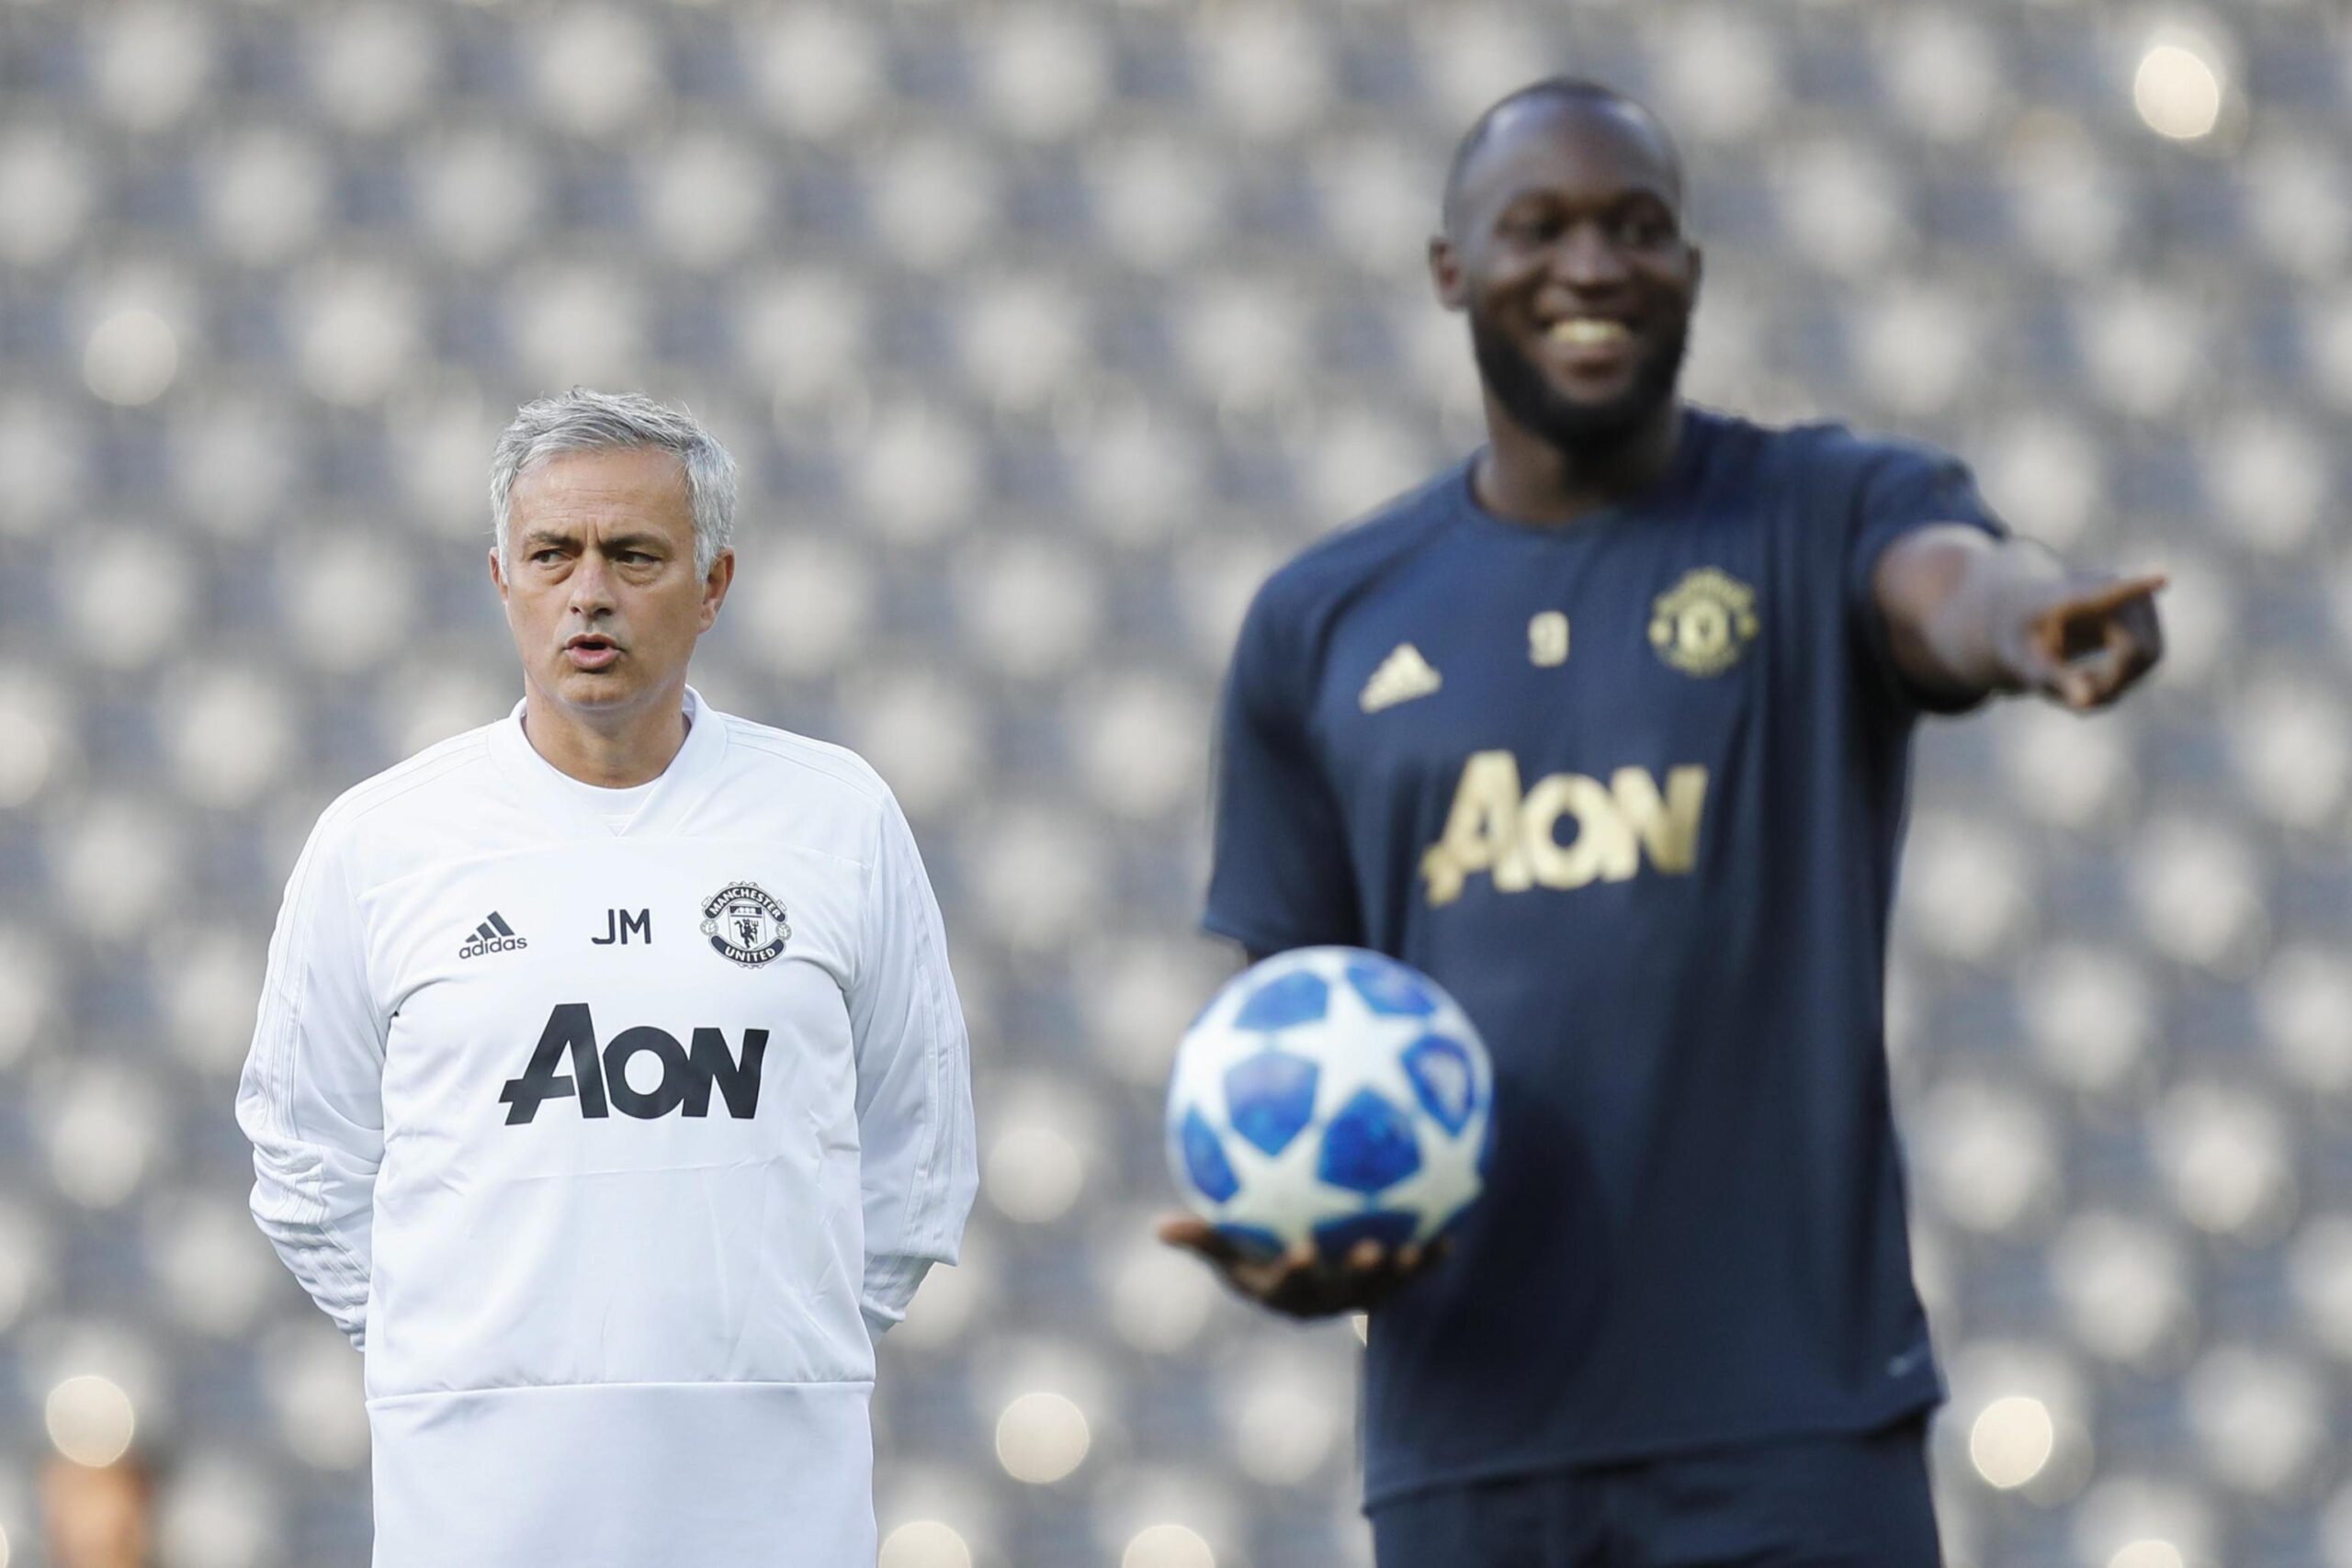 epa07030320 Manchester United's head coach Jose Mourinho (L) and his player Romelu Lukaku attend a training session in Bern, Switzerland, 18 September 2018. Manchester United will face BSC Young Boys Bern in an UEFA Champions League group stage soccer match on 19 September.  EPA/PETER KLAUNZER